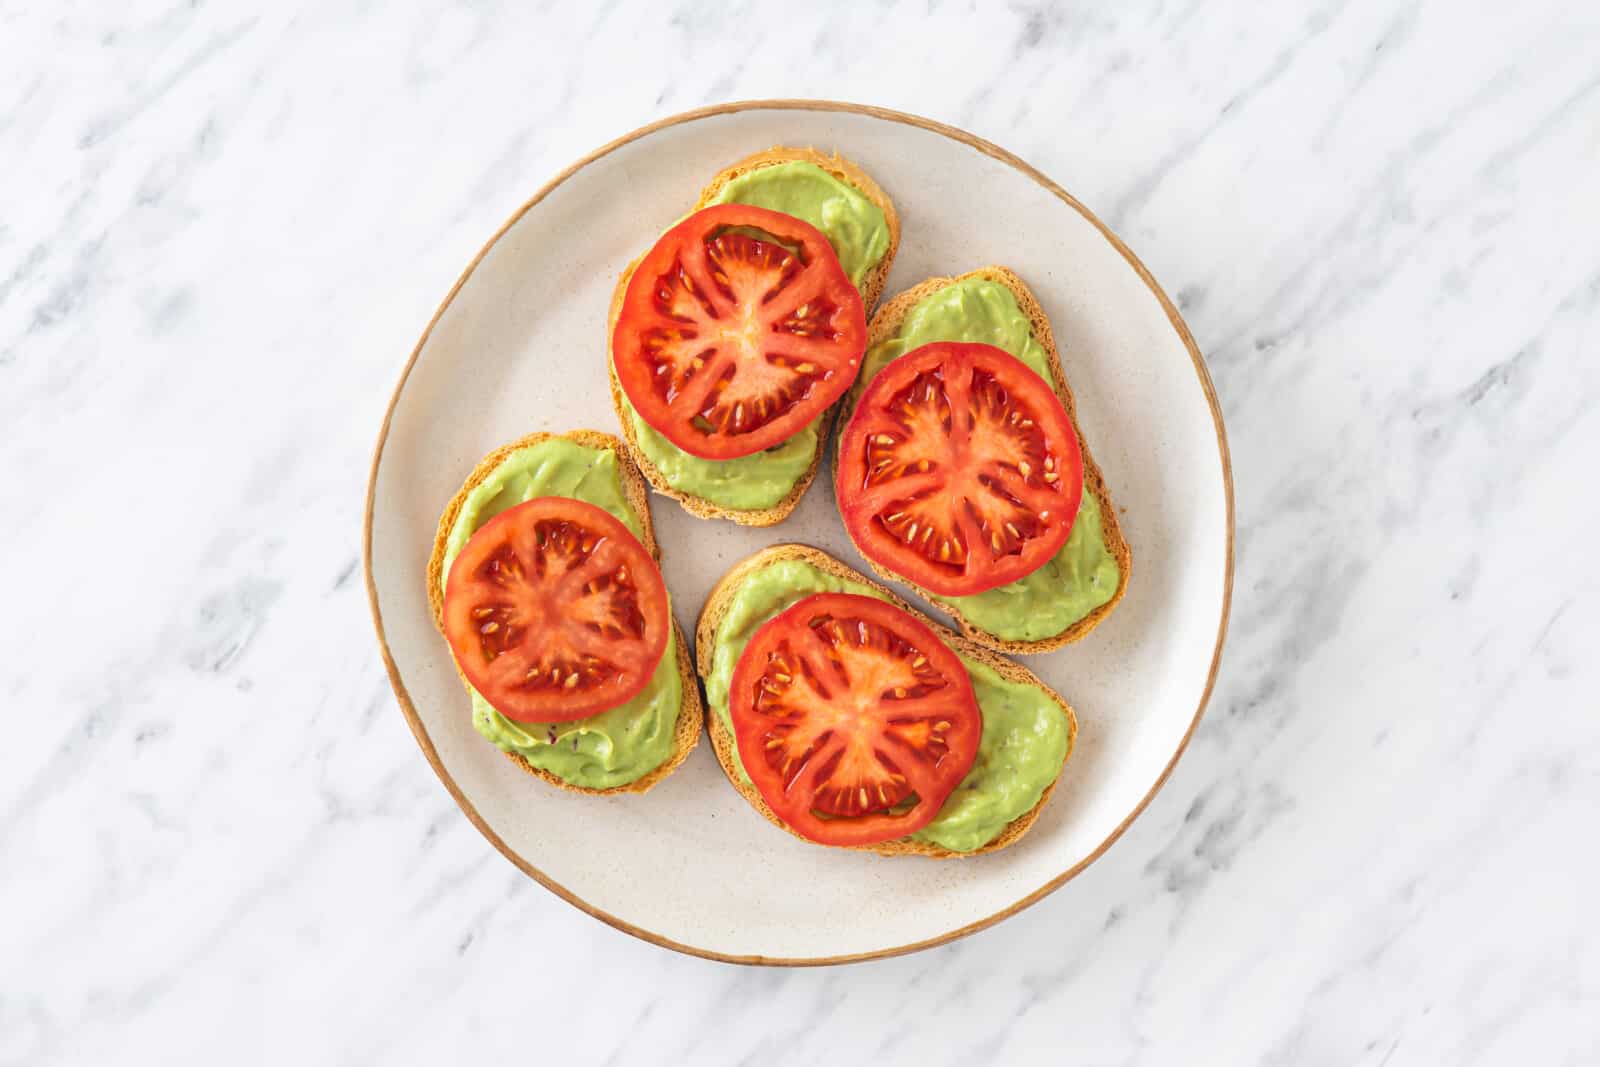 tomato slices on each avocado toast appetizer on a white plate.